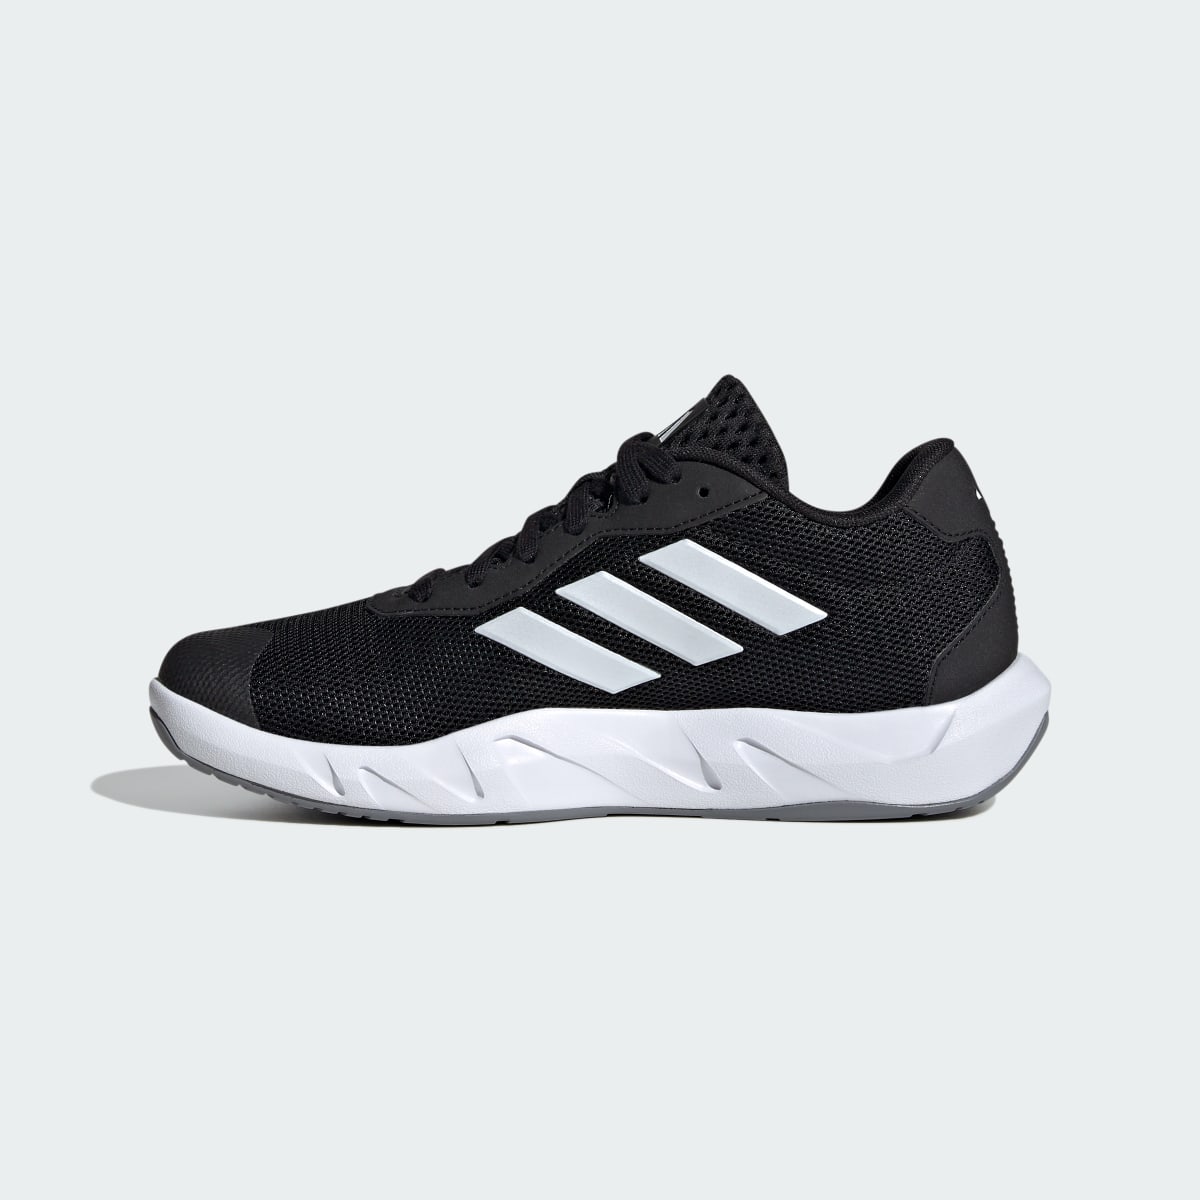 Adidas Amplimove Trainer Shoes. 7